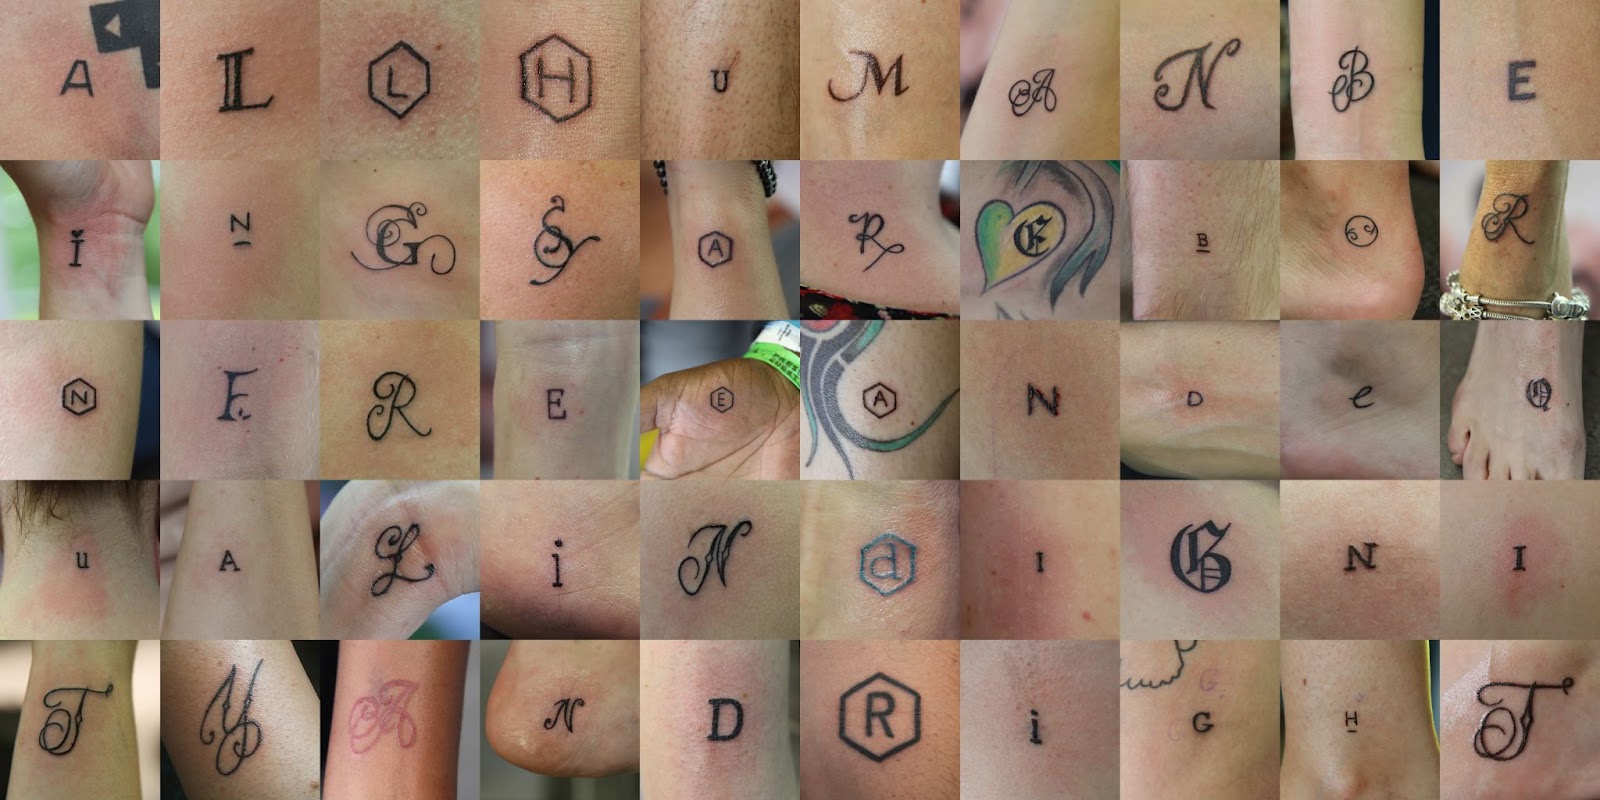 human-rights-tattoo-collage-all-together